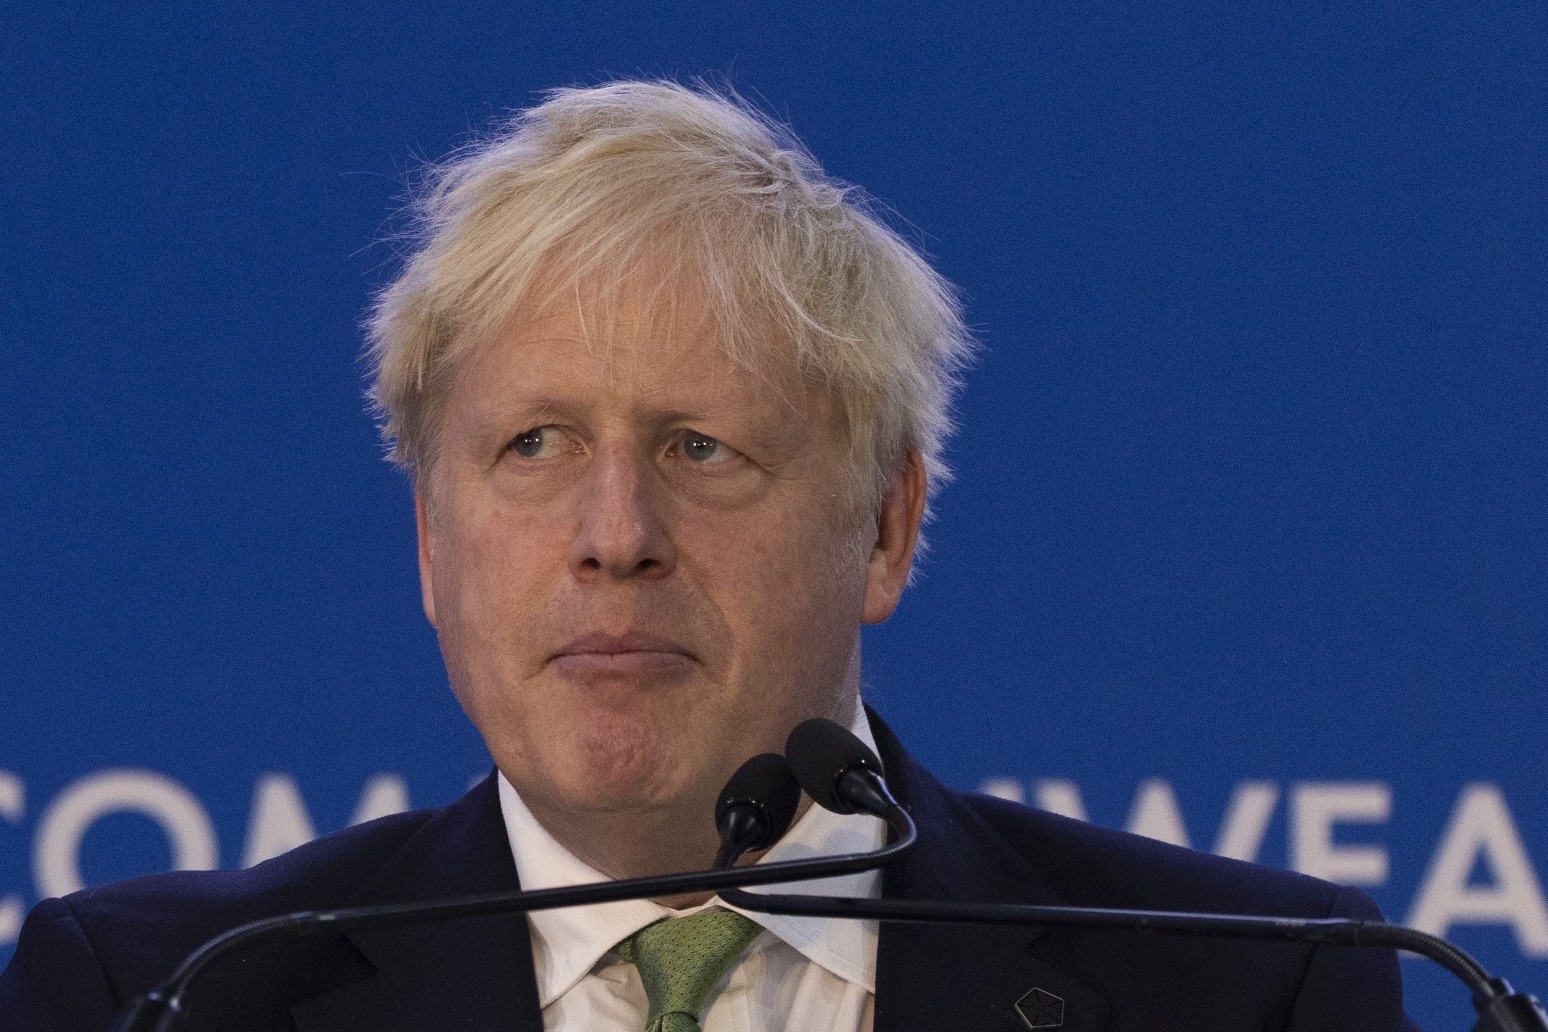 Johnson vows to ‘keep going’ after double by-election humiliation 